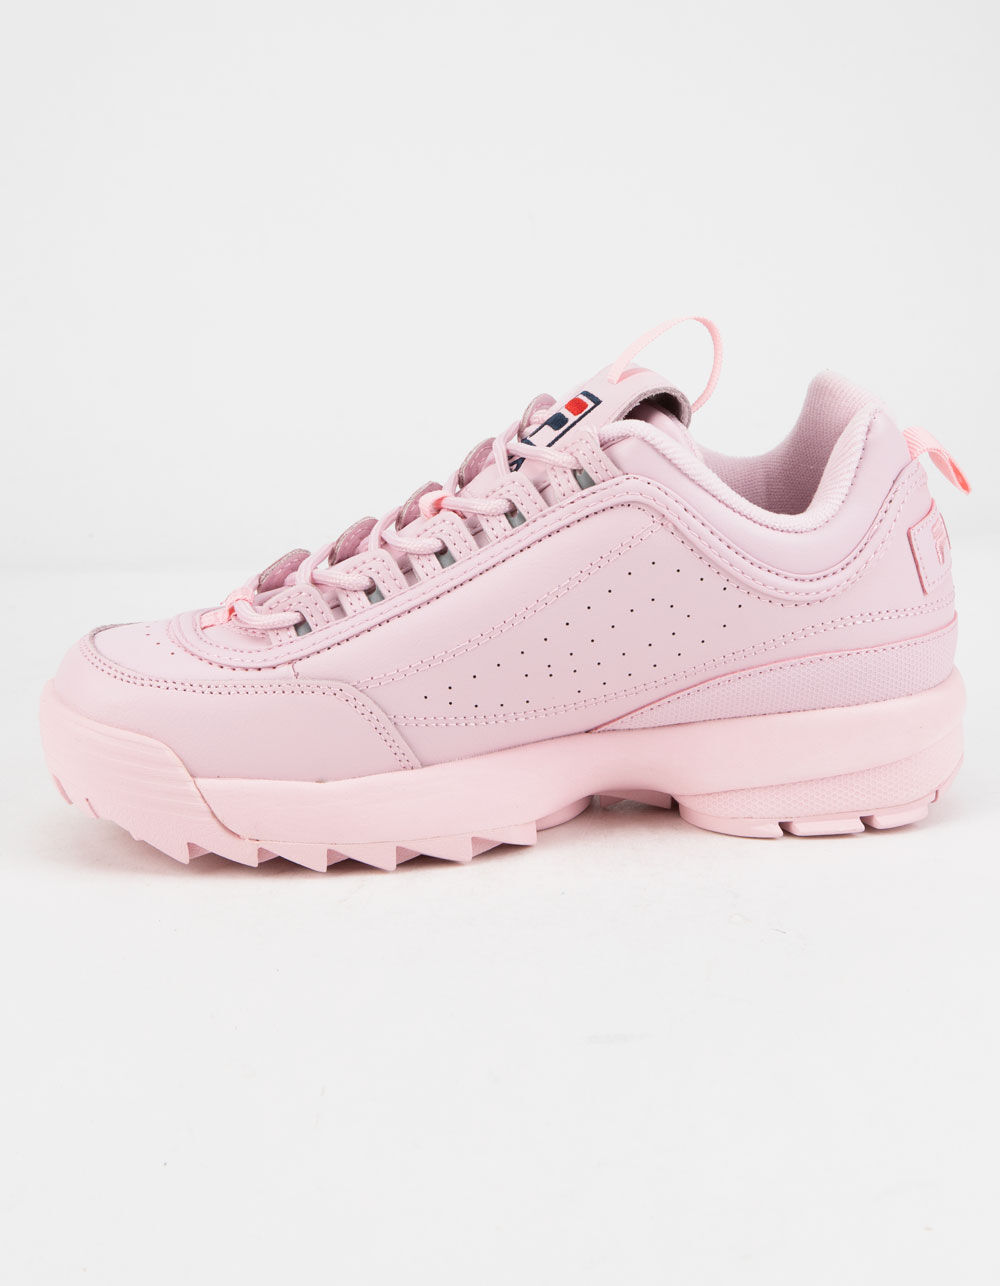 FILA Disruptor 2 Embroidery Pink Womens Shoes - PINK | Tillys